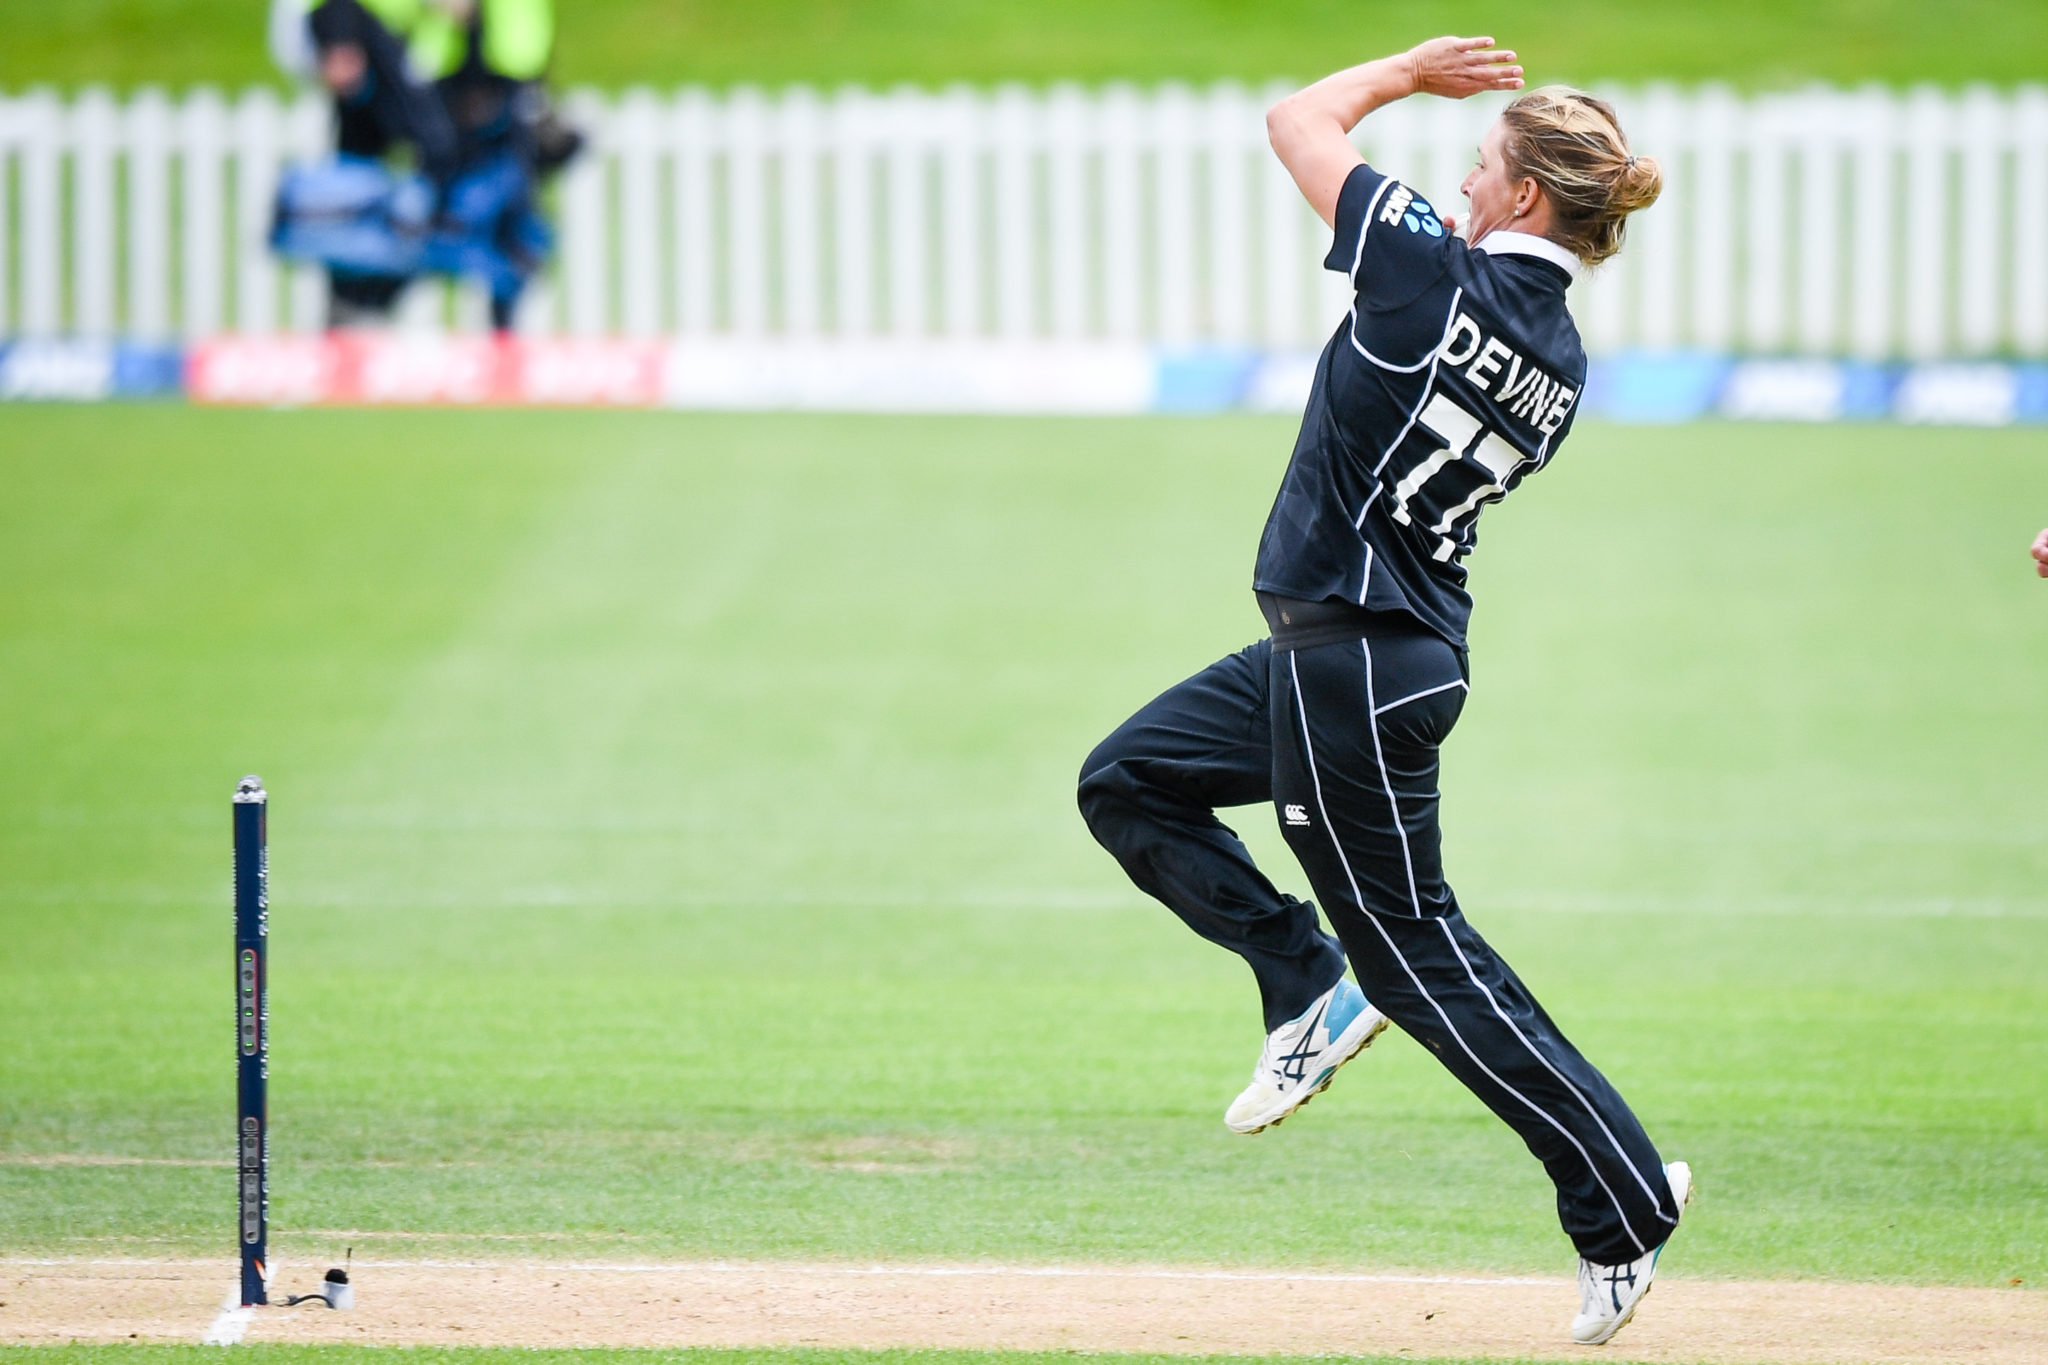 ICC Women's Cricket World Cup 2022 calls on locals of Aotearoa to become tournamenttime